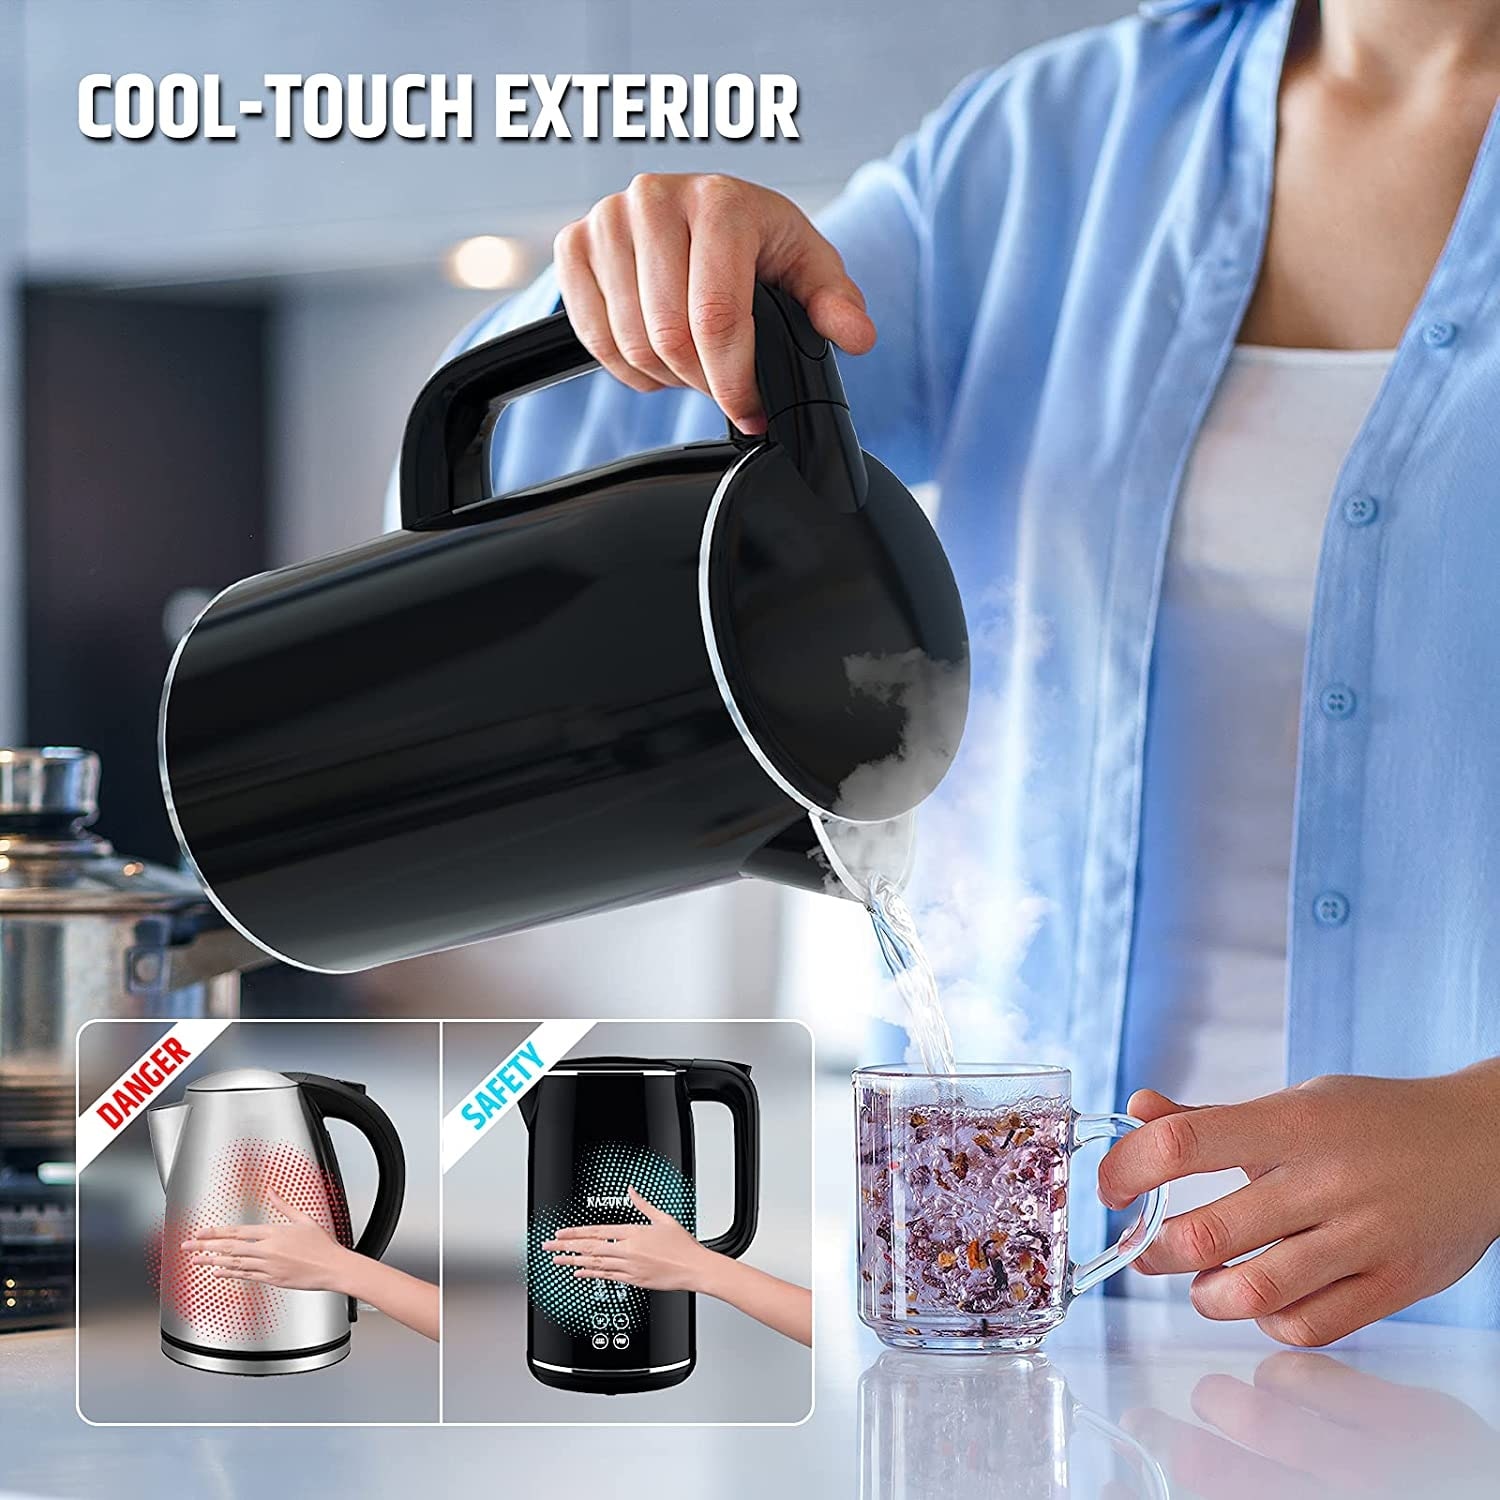 https://ak1.ostkcdn.com/images/products/is/images/direct/e799ac6c7145ee7dc168fd010bf5b8f570f2be65/Razorri-Electric-Kettle-1-Click-Control-LED-Digital-Display%2C-1.7-Liter%2C-BPA-Free%2C-Boil-Dry-Protection%2C-Keeps-Warm-Up-to-2-Hours.jpg